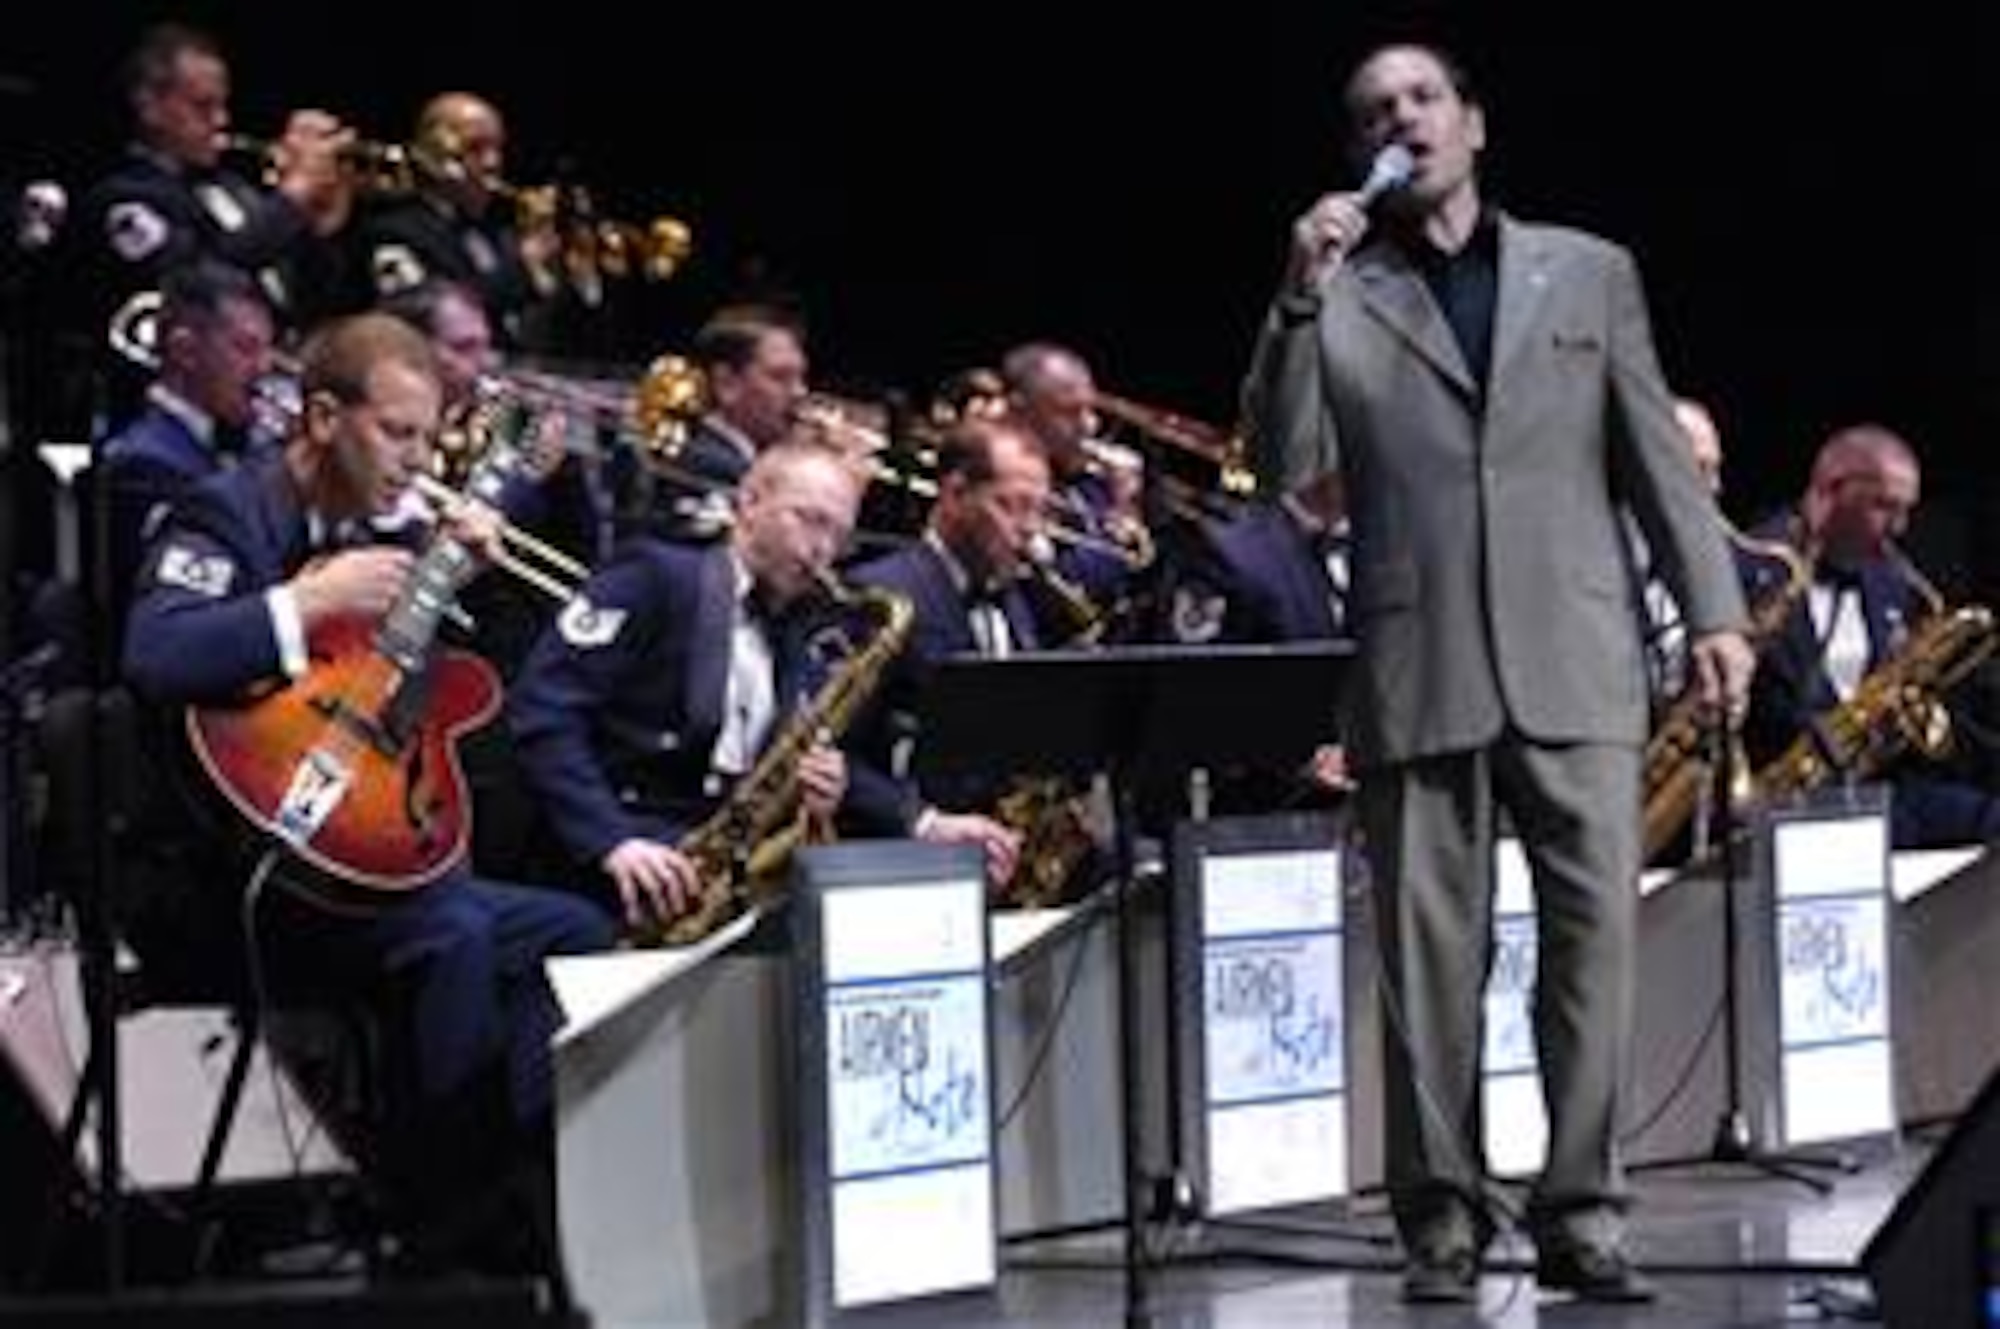 Guest artist Kurt Elling performs with the U.S. Air Force Band's Airmen of Note Sept. 6, 2008 at Lisner Auditorium. Mr. Elling and the Airmen of Note opened the Band's 2008 Jazz Heritage Series. Radio listeners can hear performances by The U.S. Air Force Band and other guest artists by logging on to www. usafband.mil/jhsbroadcasts. (U.S. Air Force photo by Senior Airman Dan DeCook)